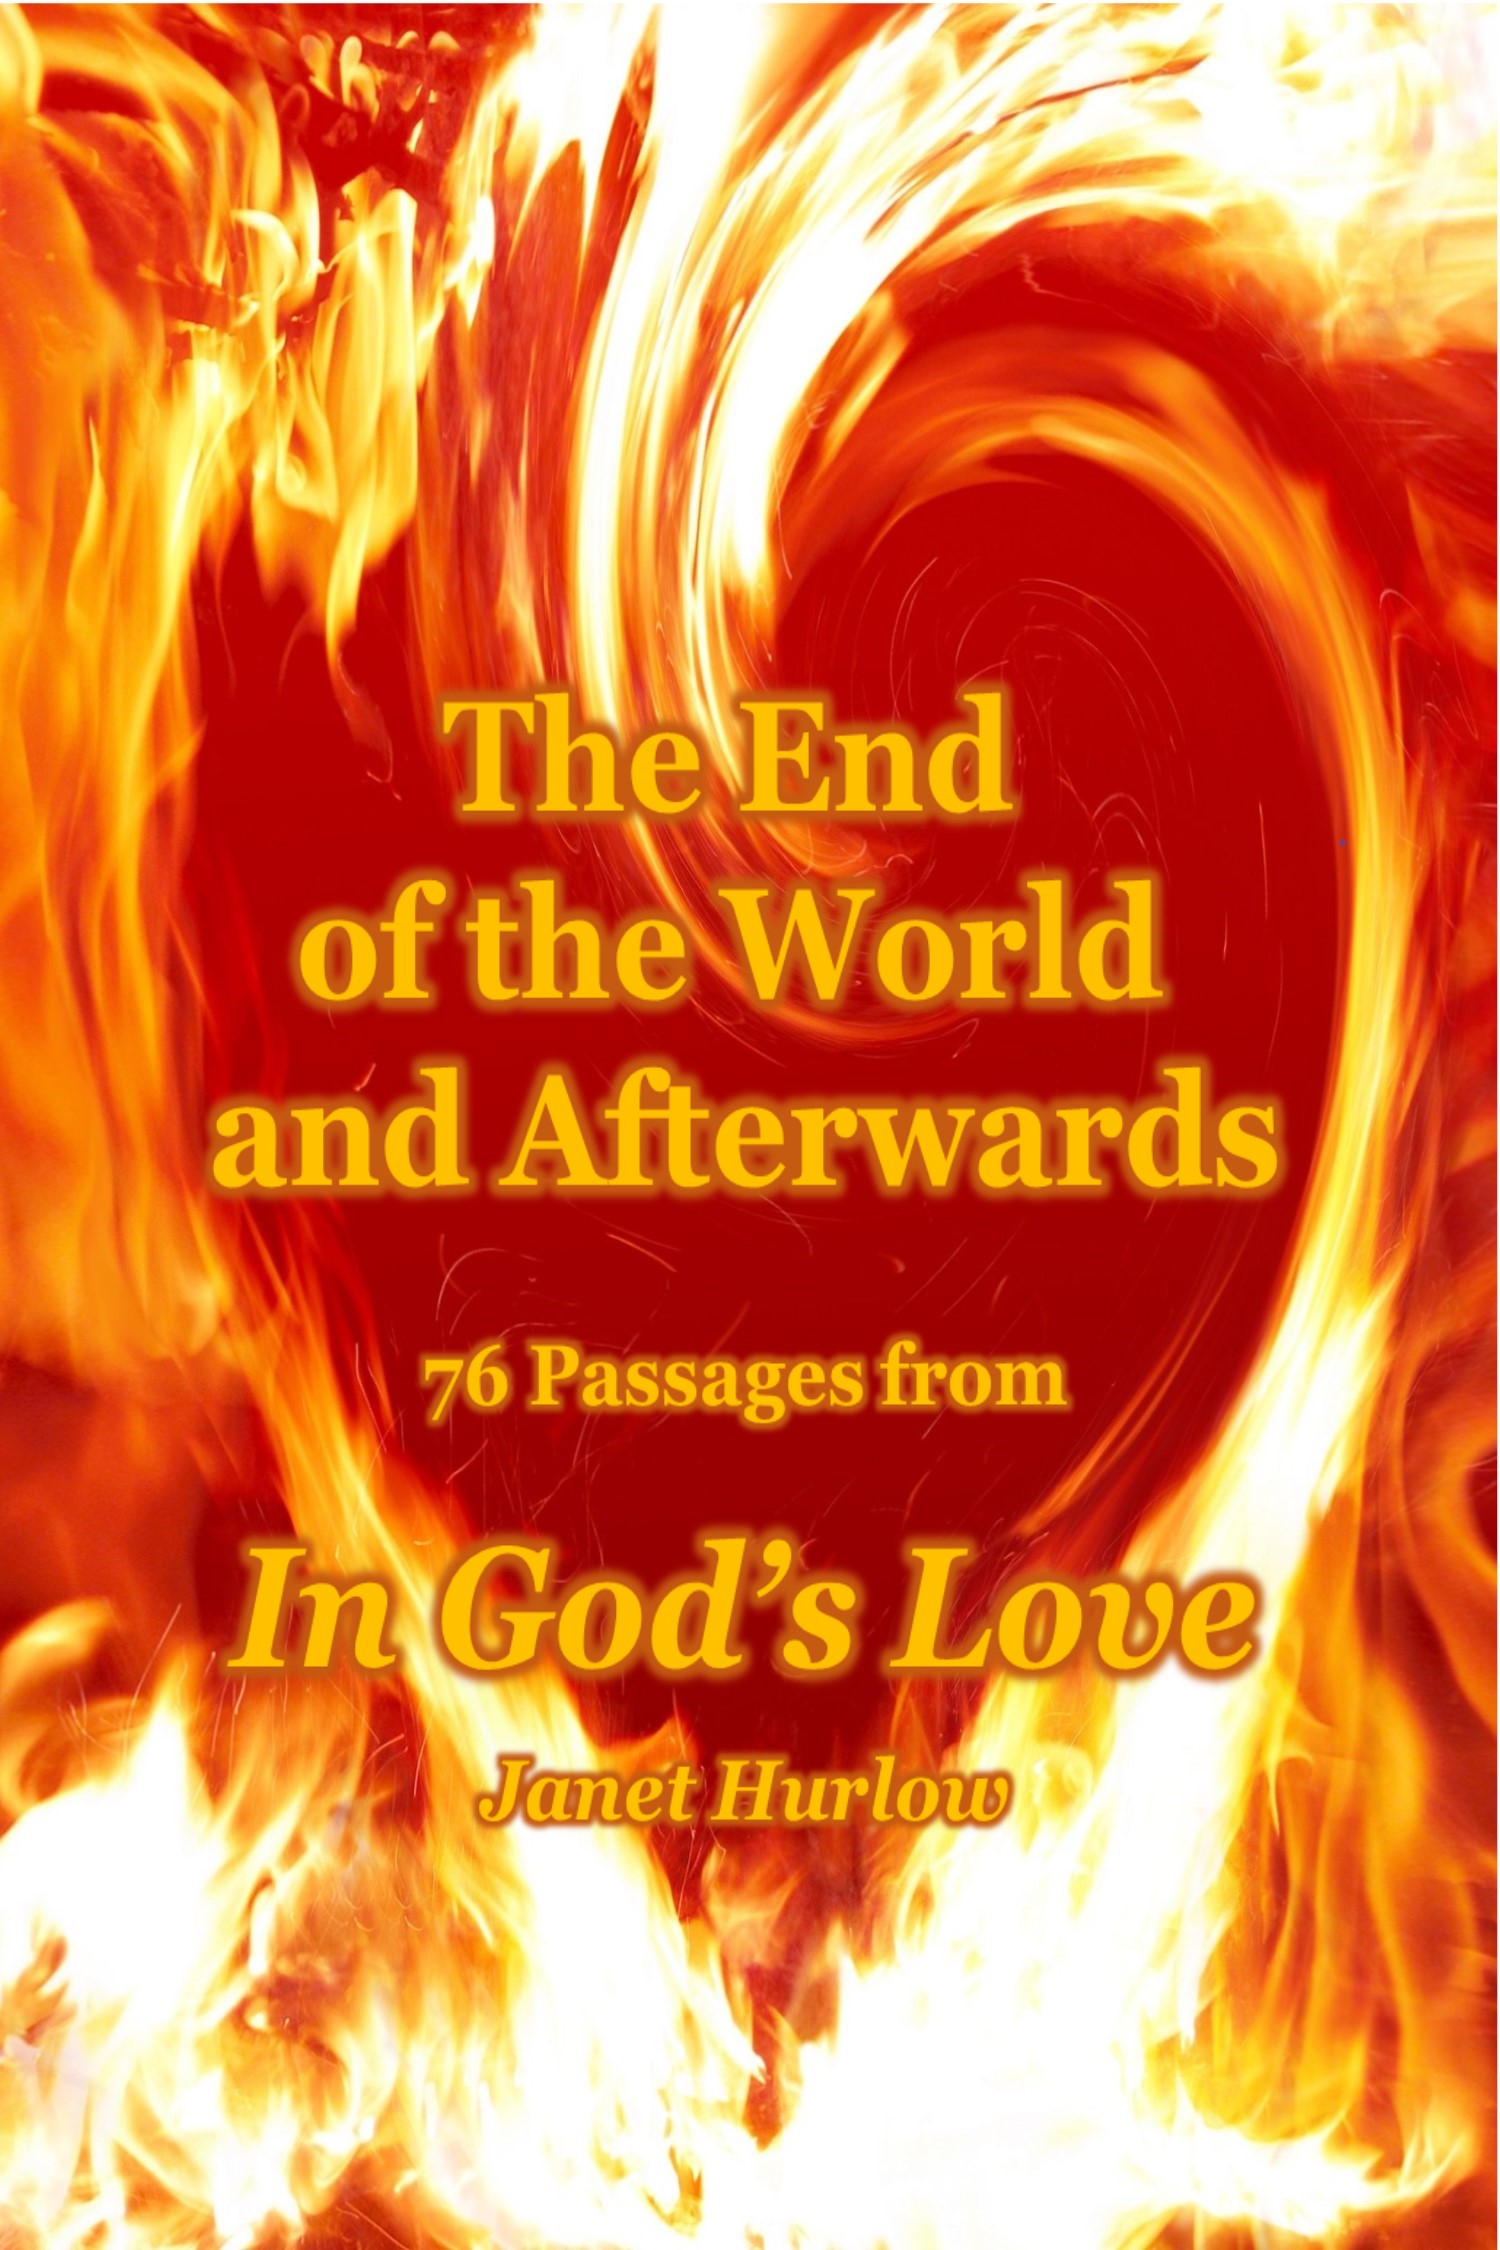 front cover of book title The End of the World 76 Passages from In God's Love by Janet Hurlow image red flaming heart abstract